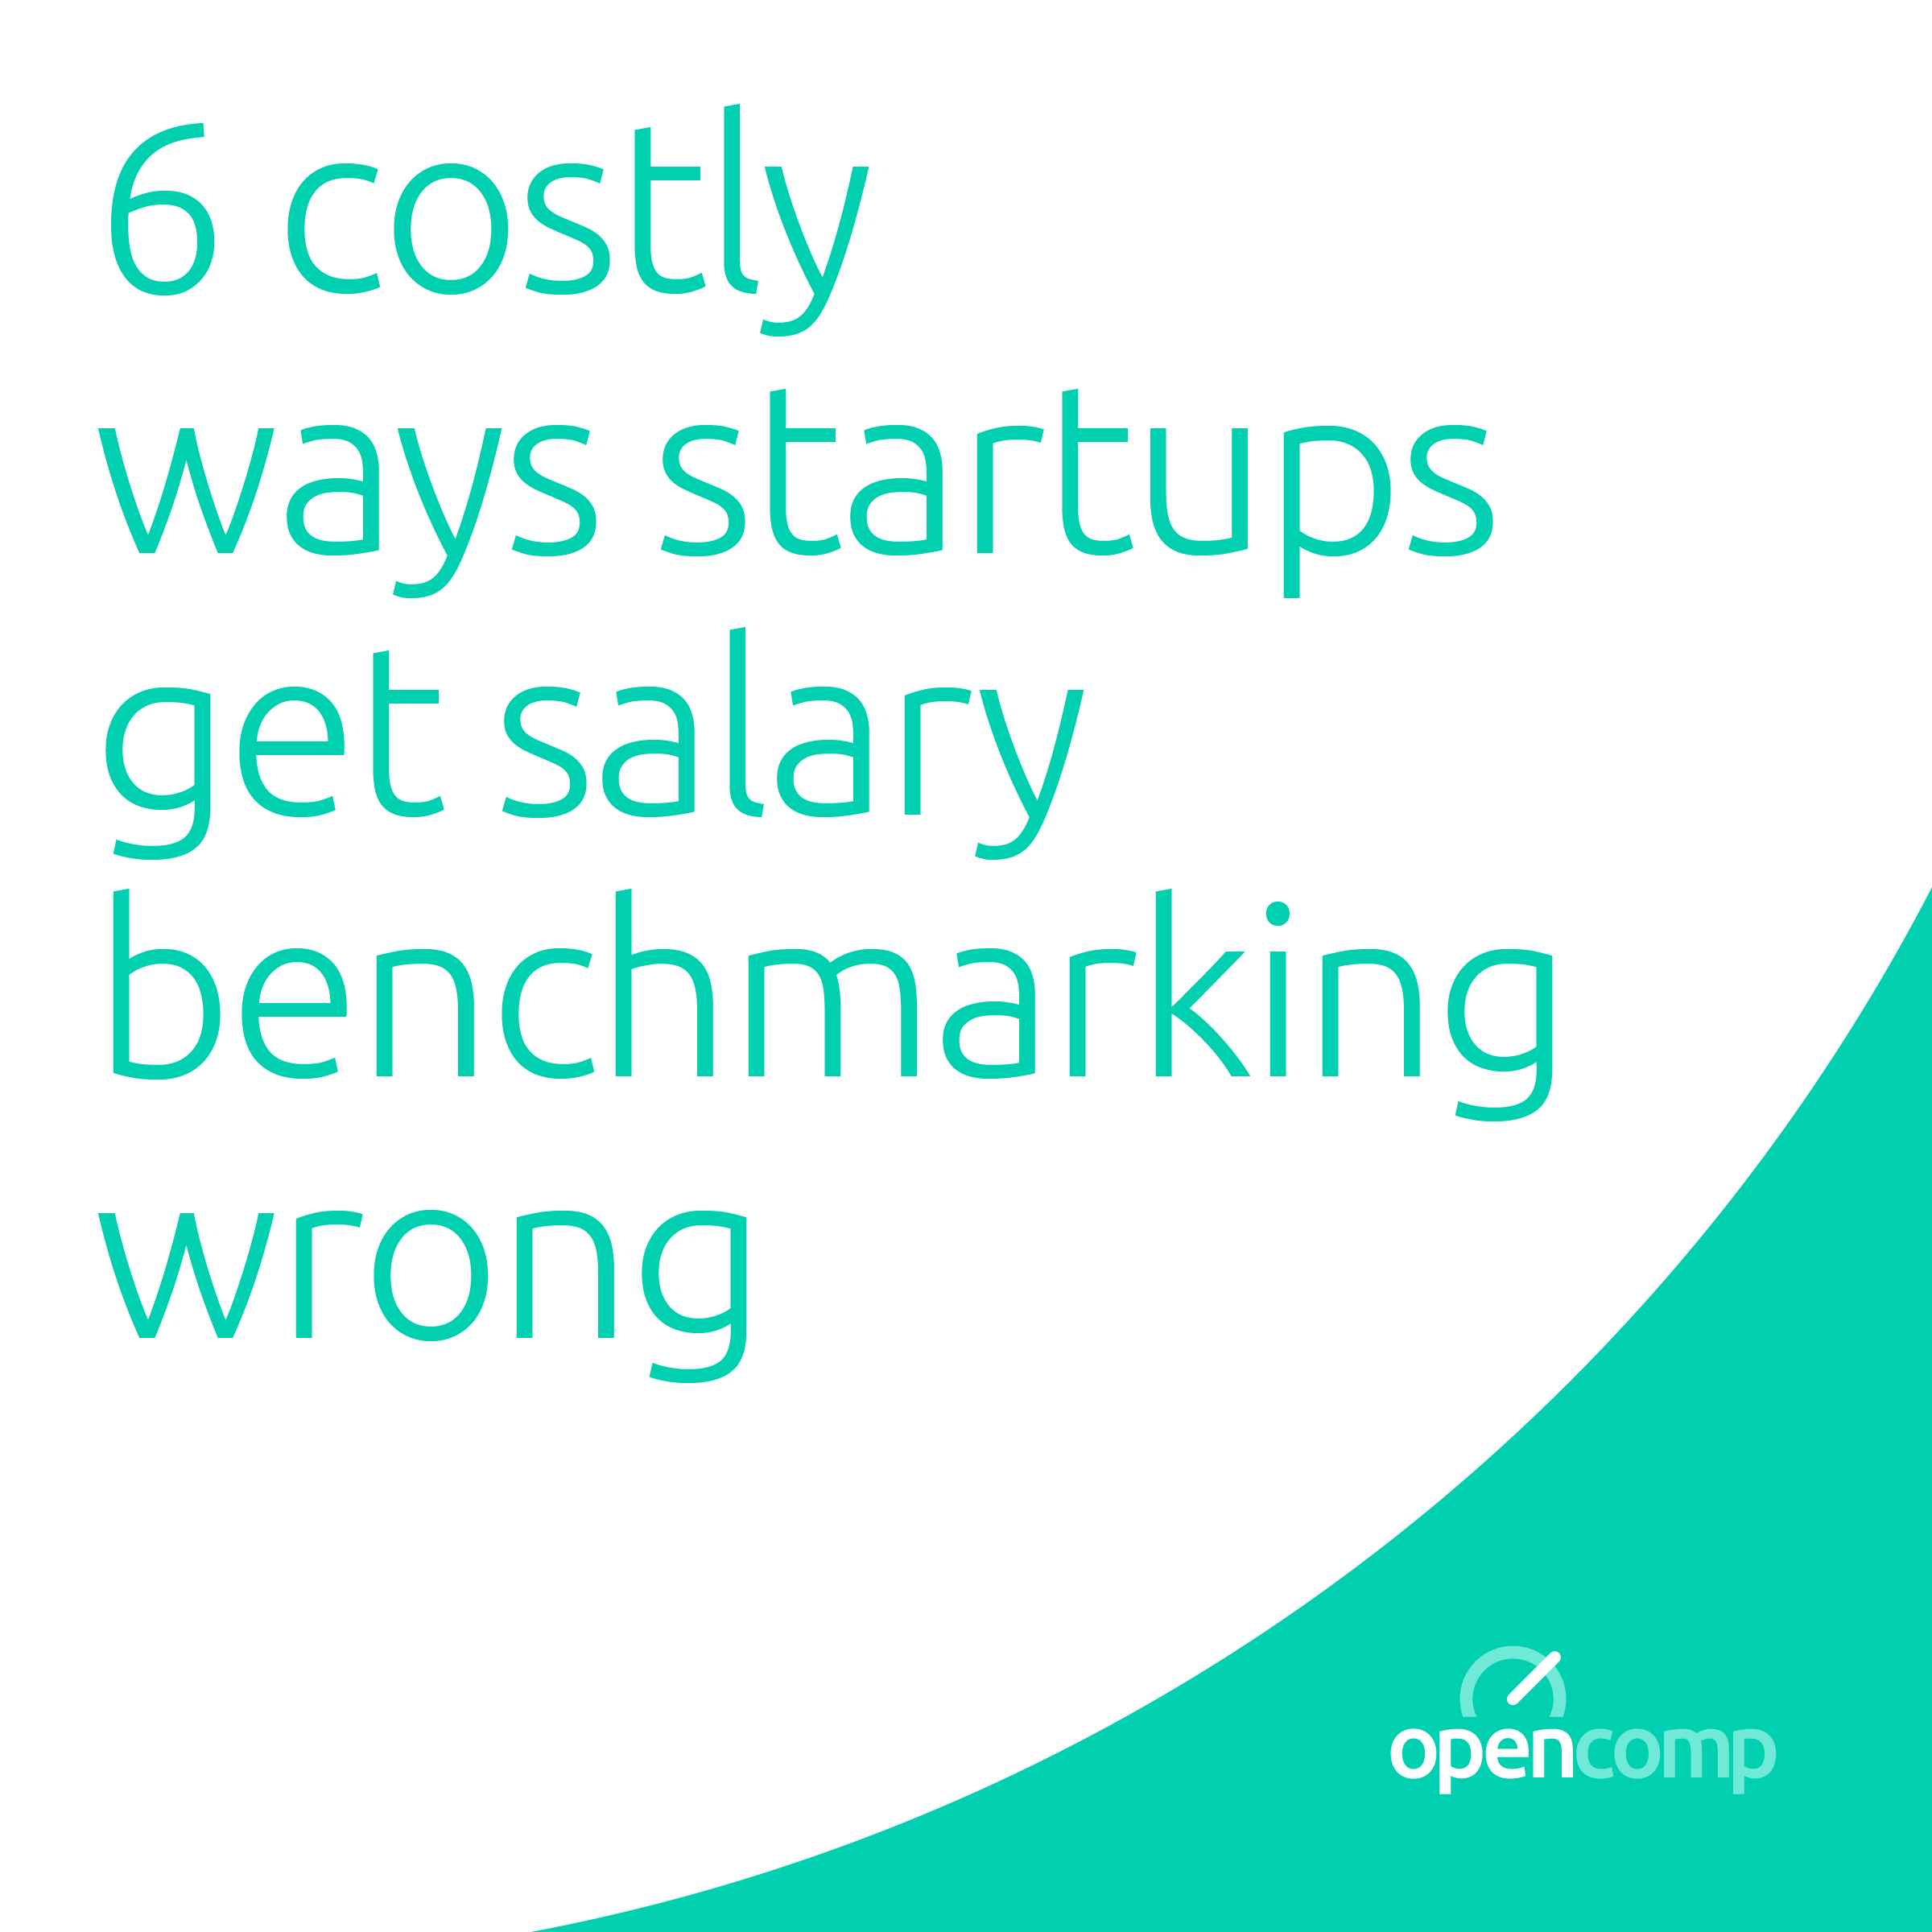 6 Costly Ways Startups Get Salary Benchmarking Wrong